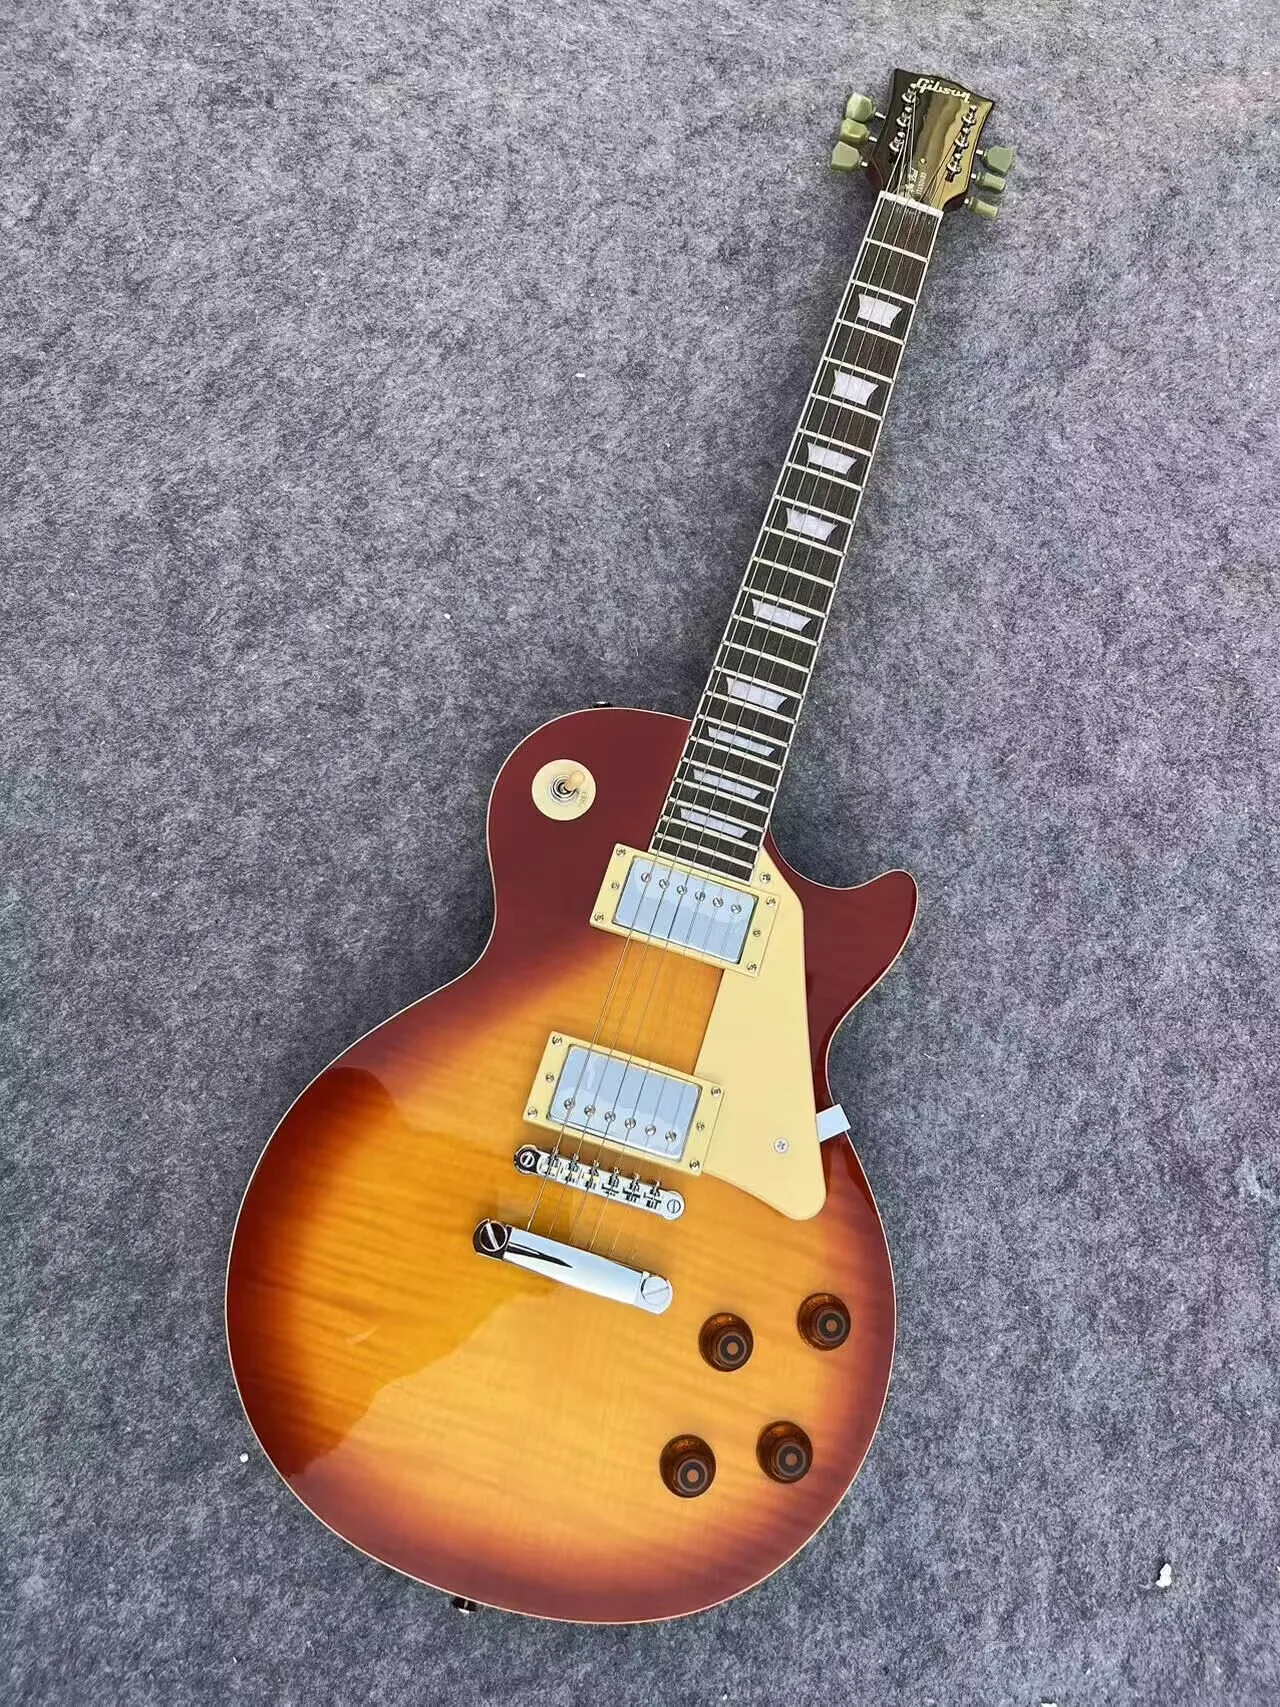 

Send in 3 days Flame Maple Top G Les Standard Brown LP Paul Electric Guitar in stock DFGFDD